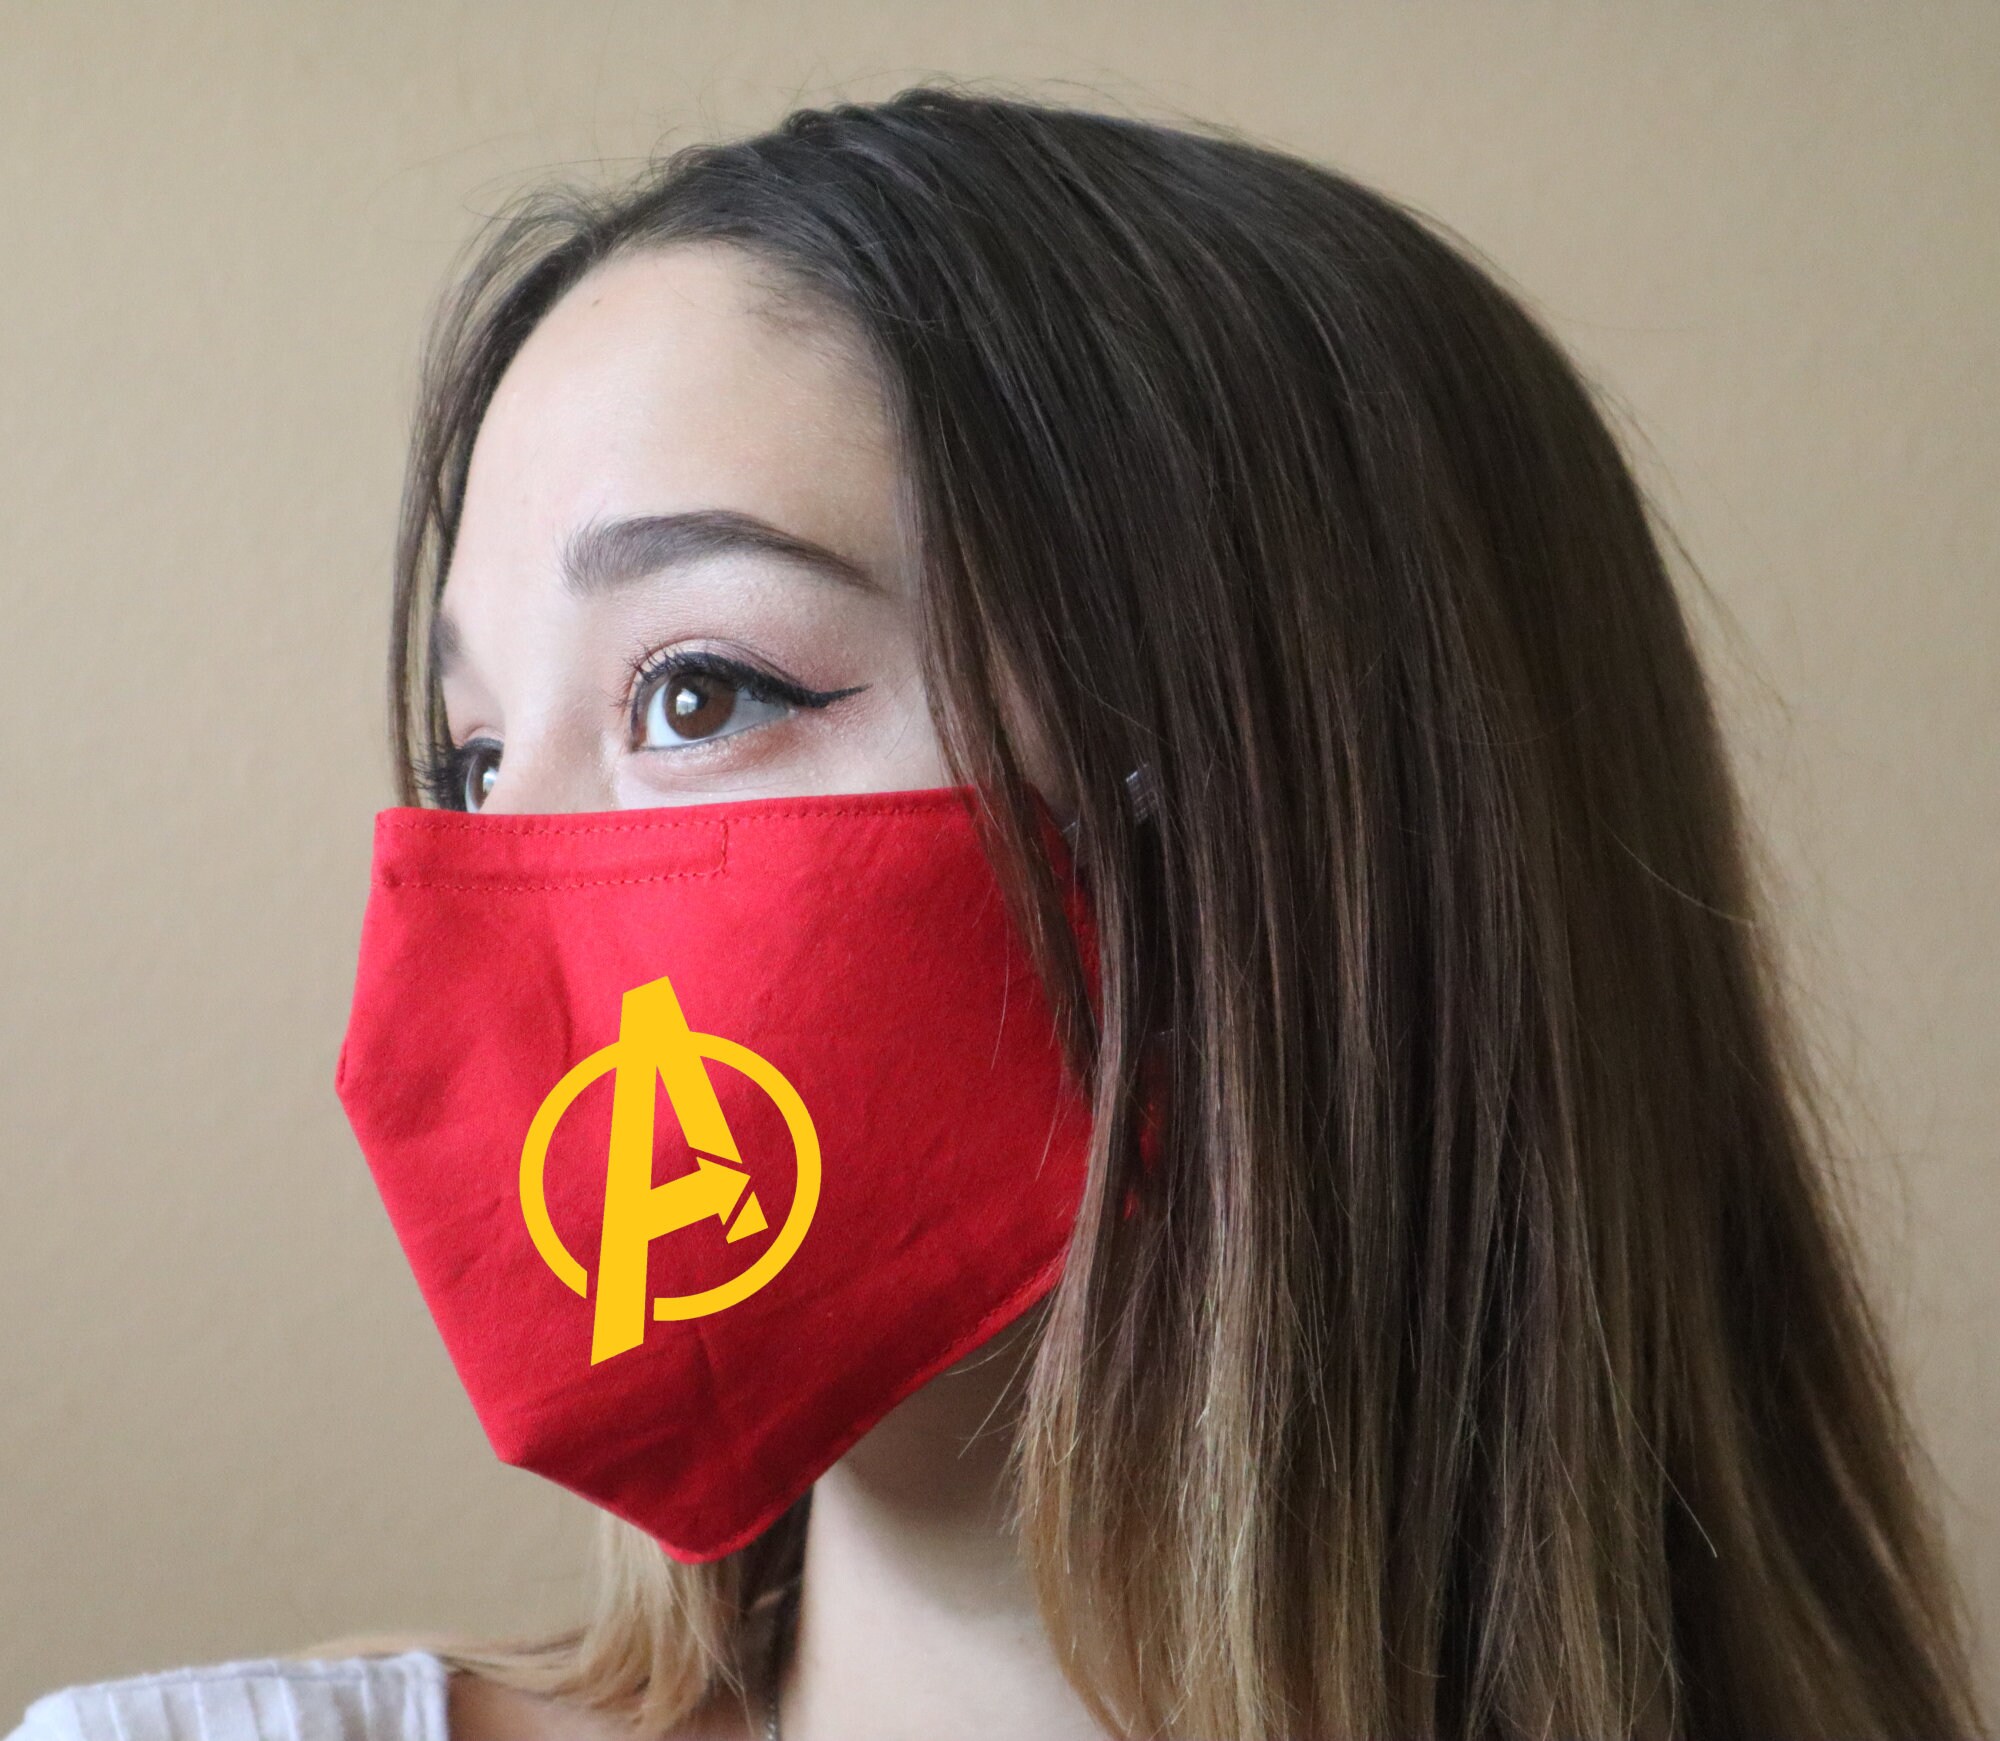 Handmade Cotton Blend Customizable Face Masks With Adjustable Ear-Loops - Super Heroes Avengers Adult Medium 9 X 5.5"